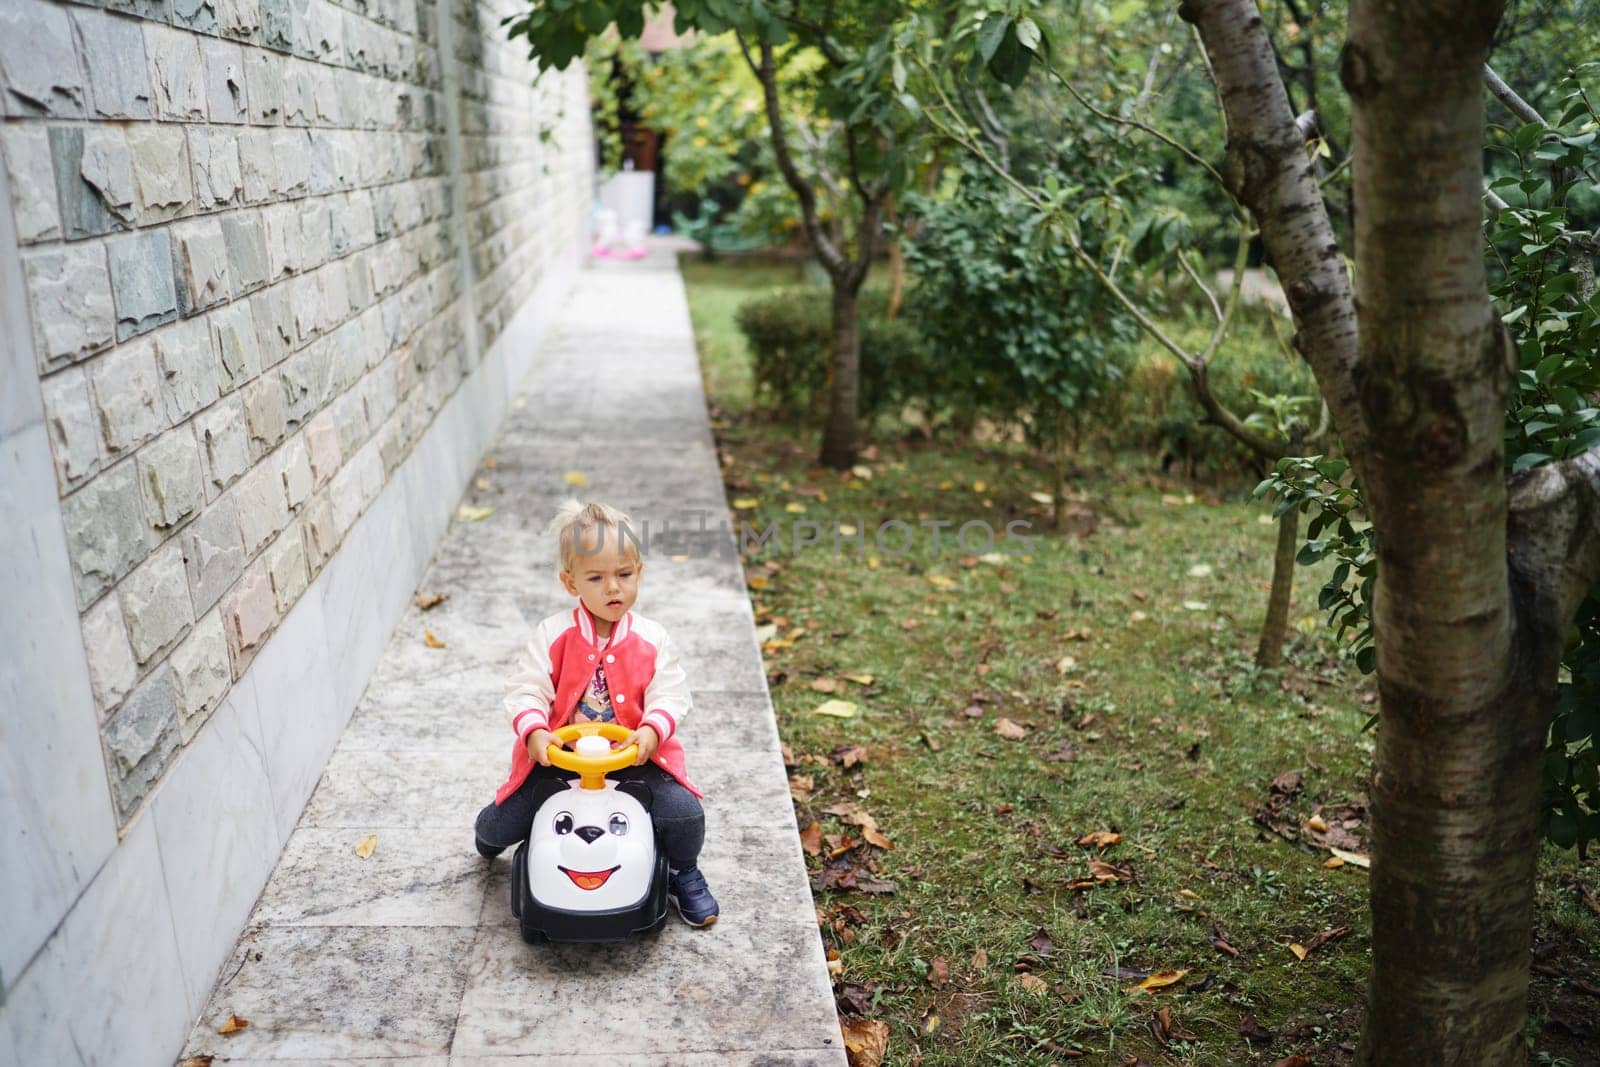 Little girl rides a colorful toy car along the wall in the garden. High quality photo